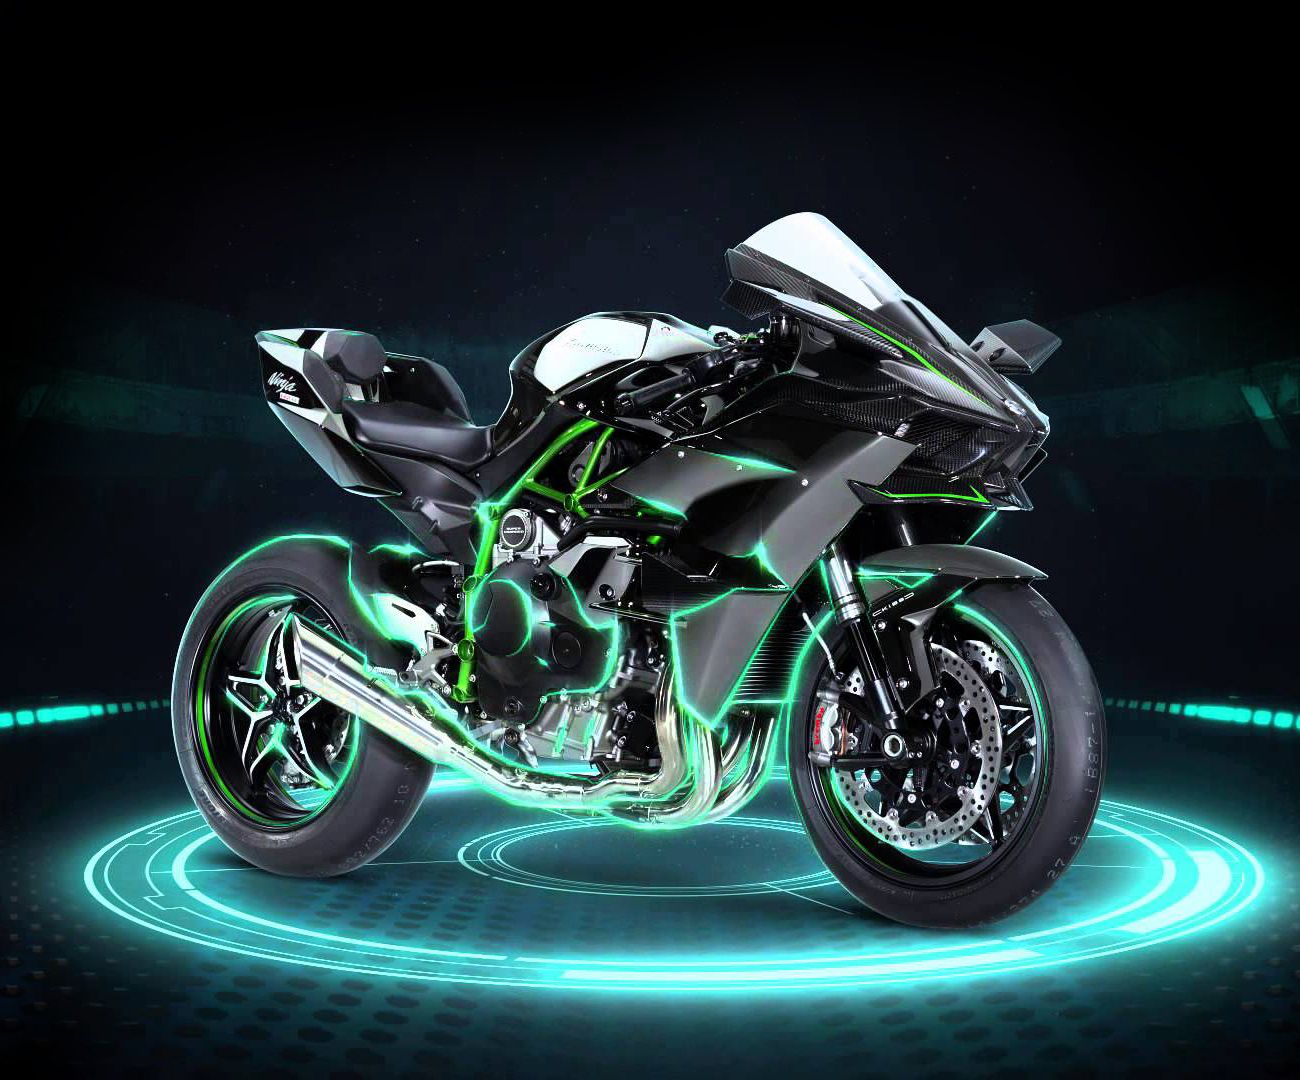 10 Worlds Fastest Motorcycles In 2019